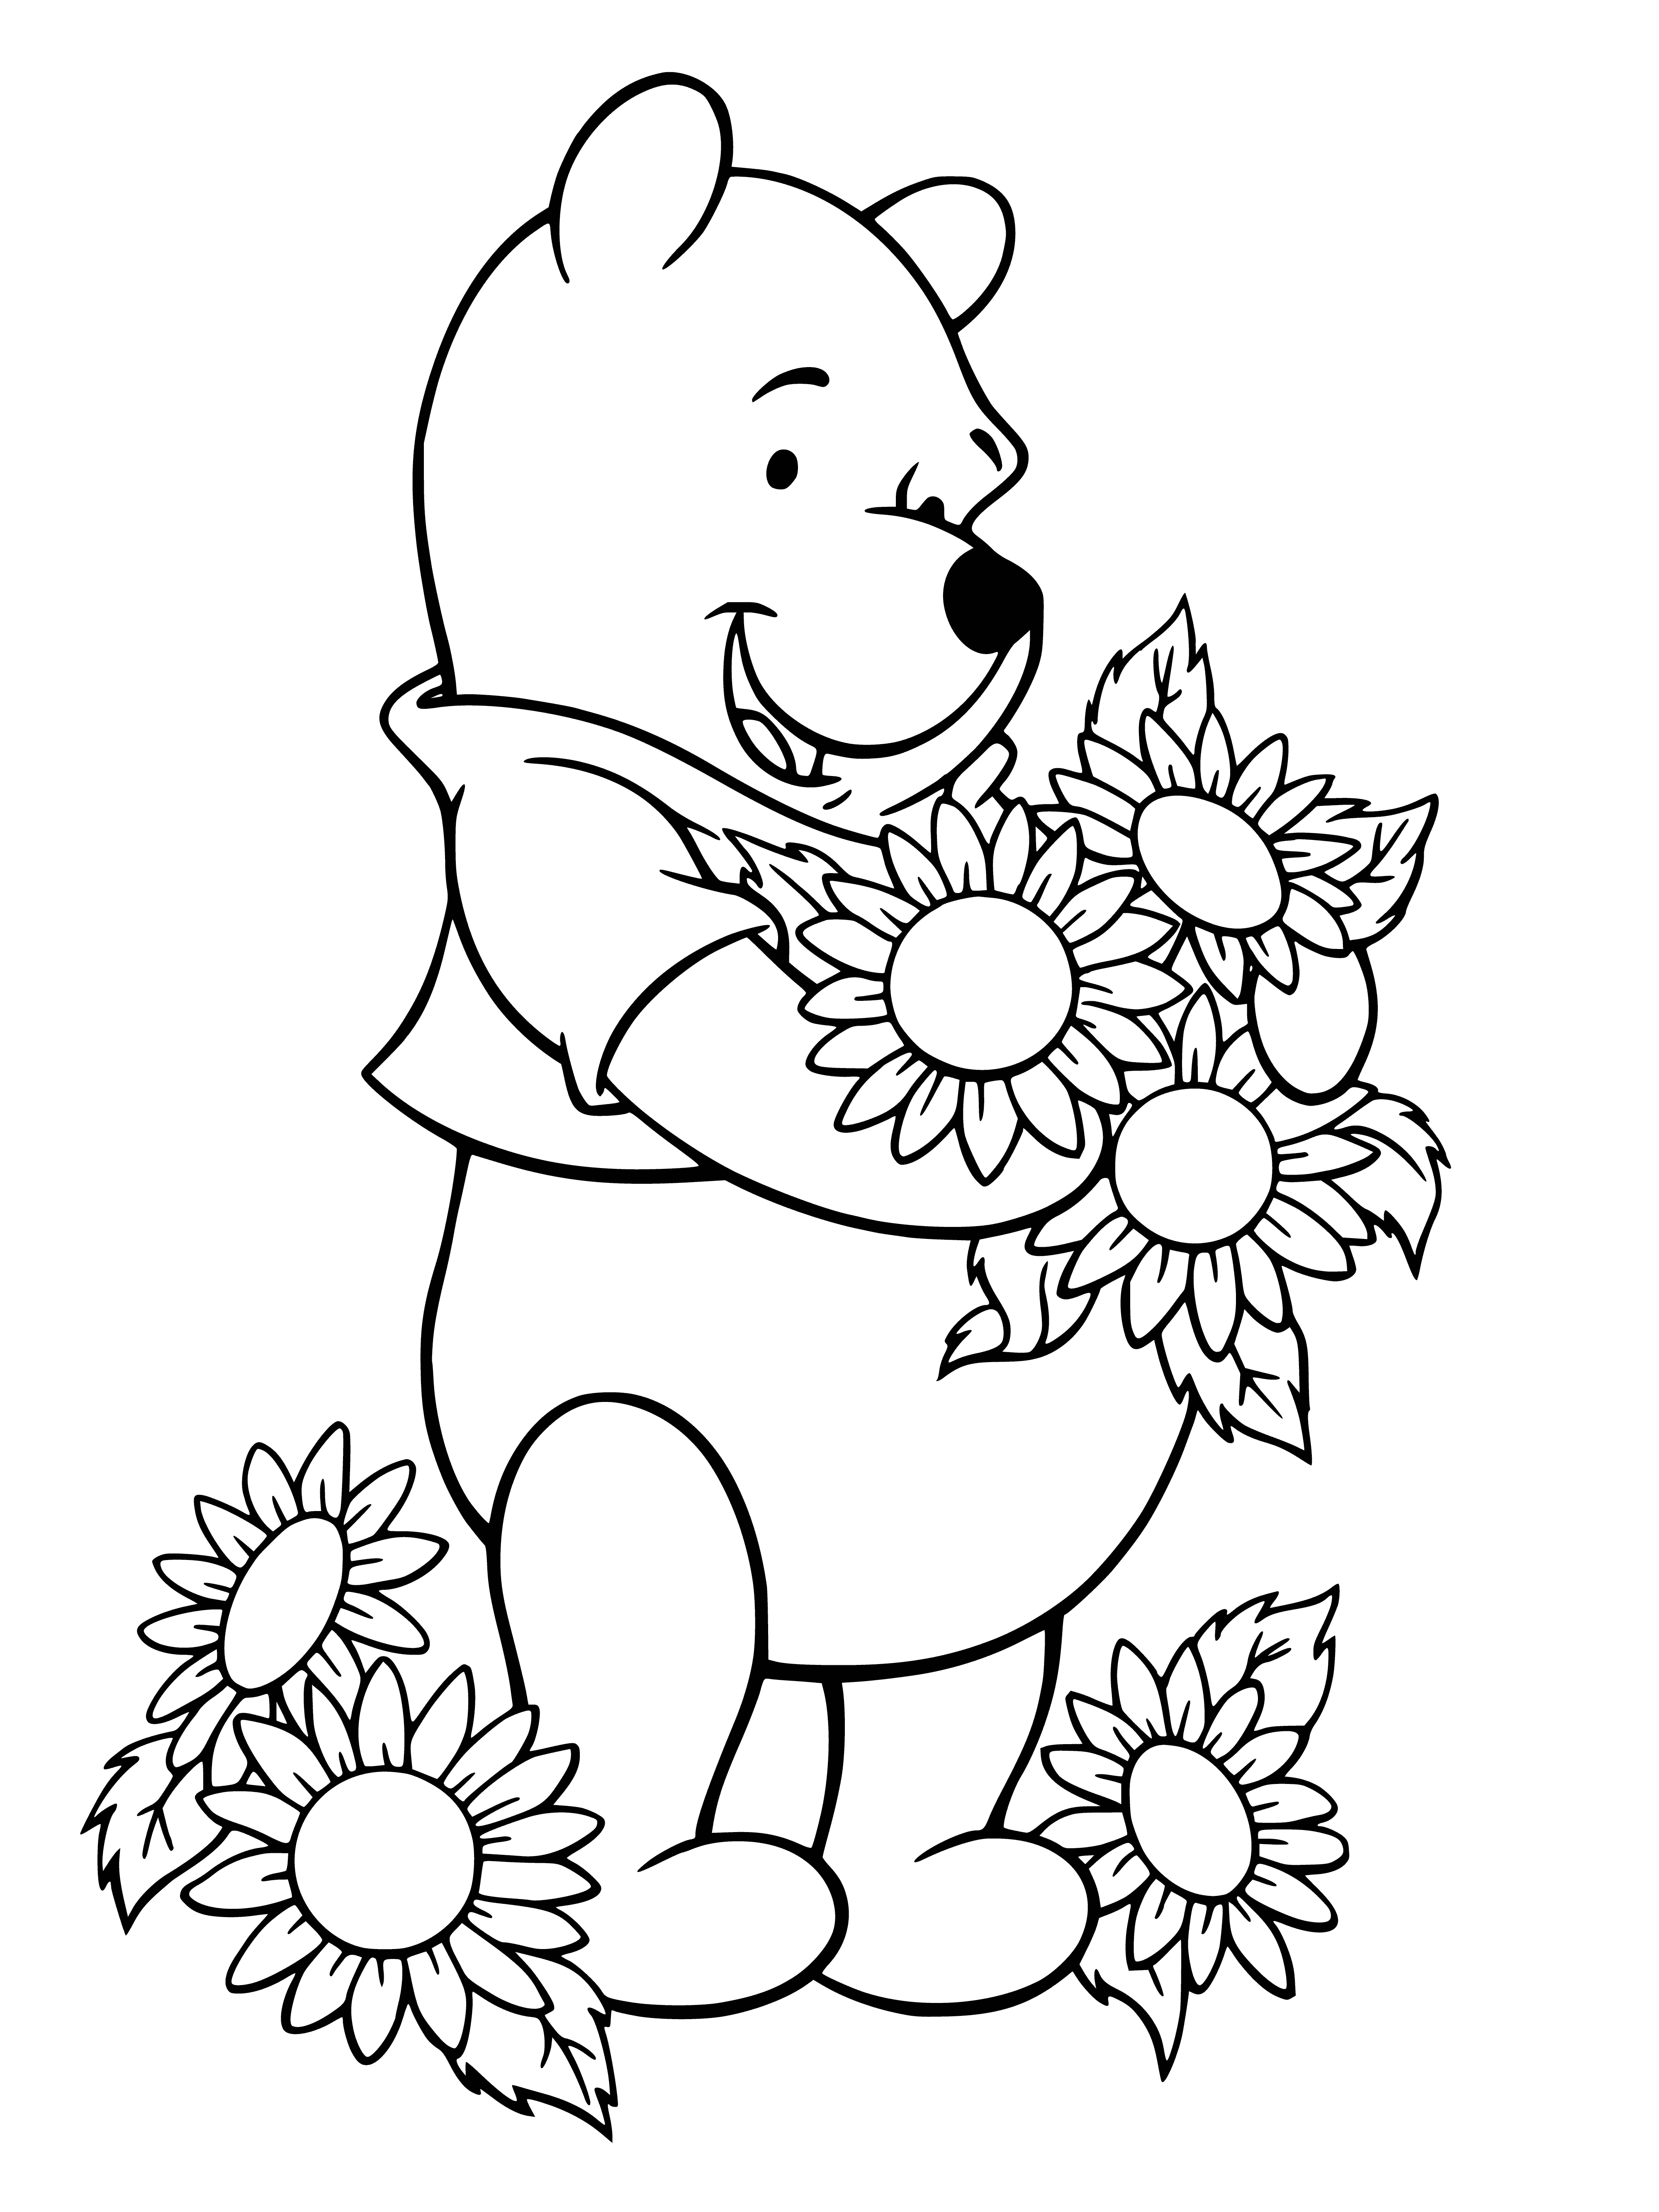 coloring page: Winnie & Piglet sit in a sunflower field, holding sunflowers & smiling at each other.